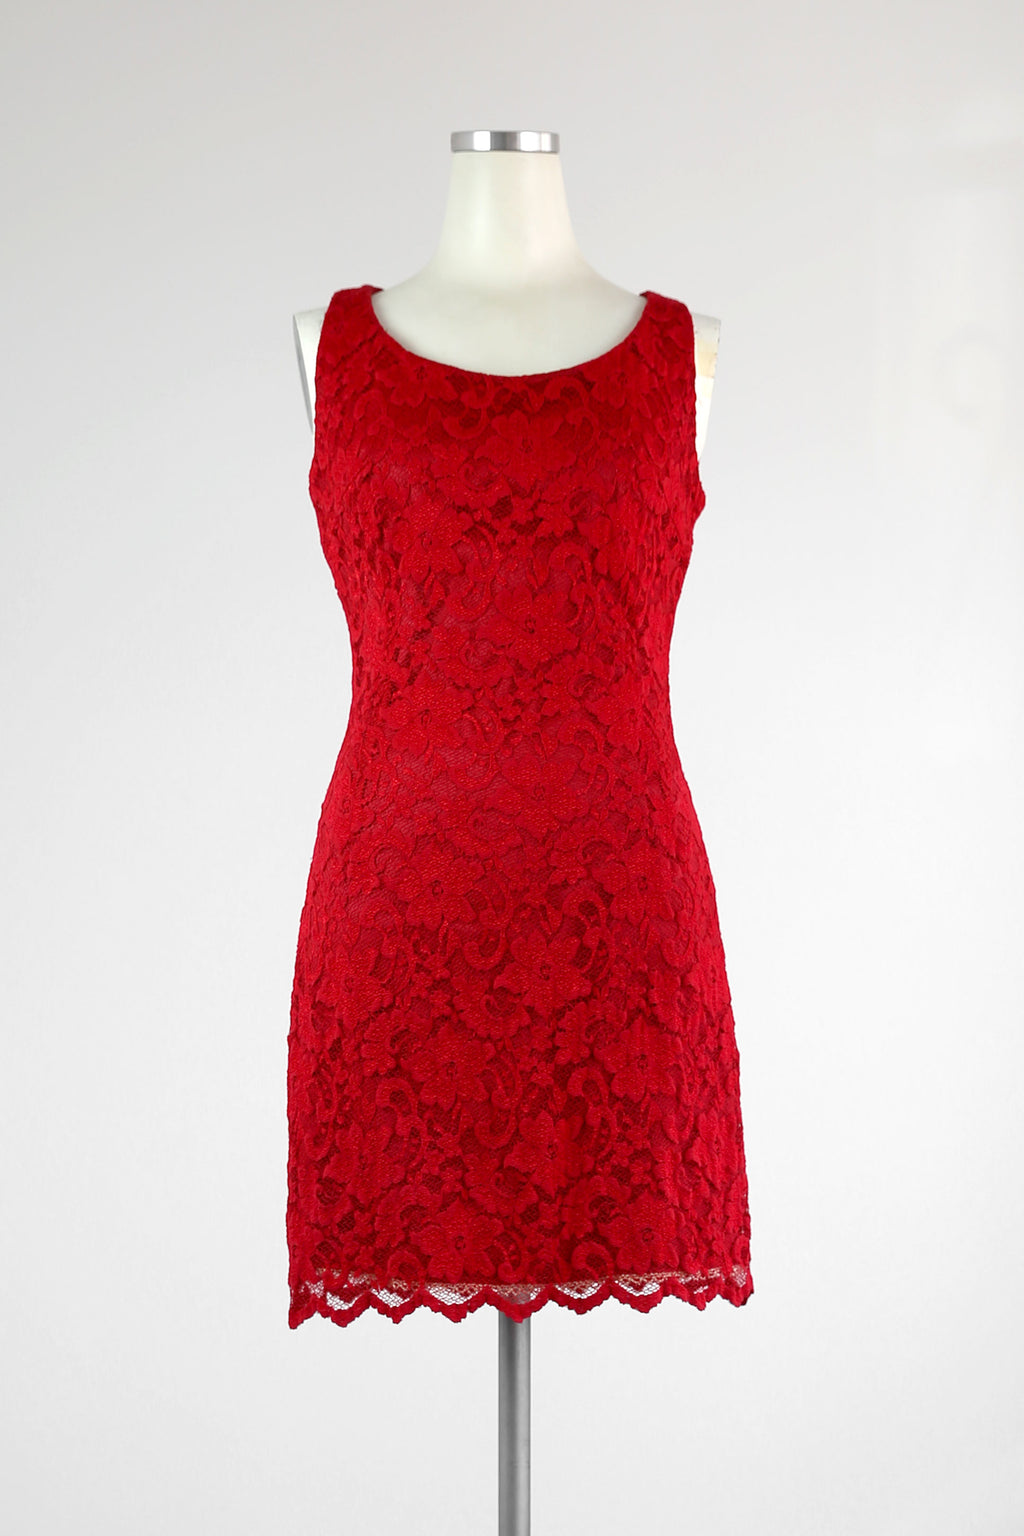 Perfect Fit Red Cocktail Dress - Tae With Jane NY